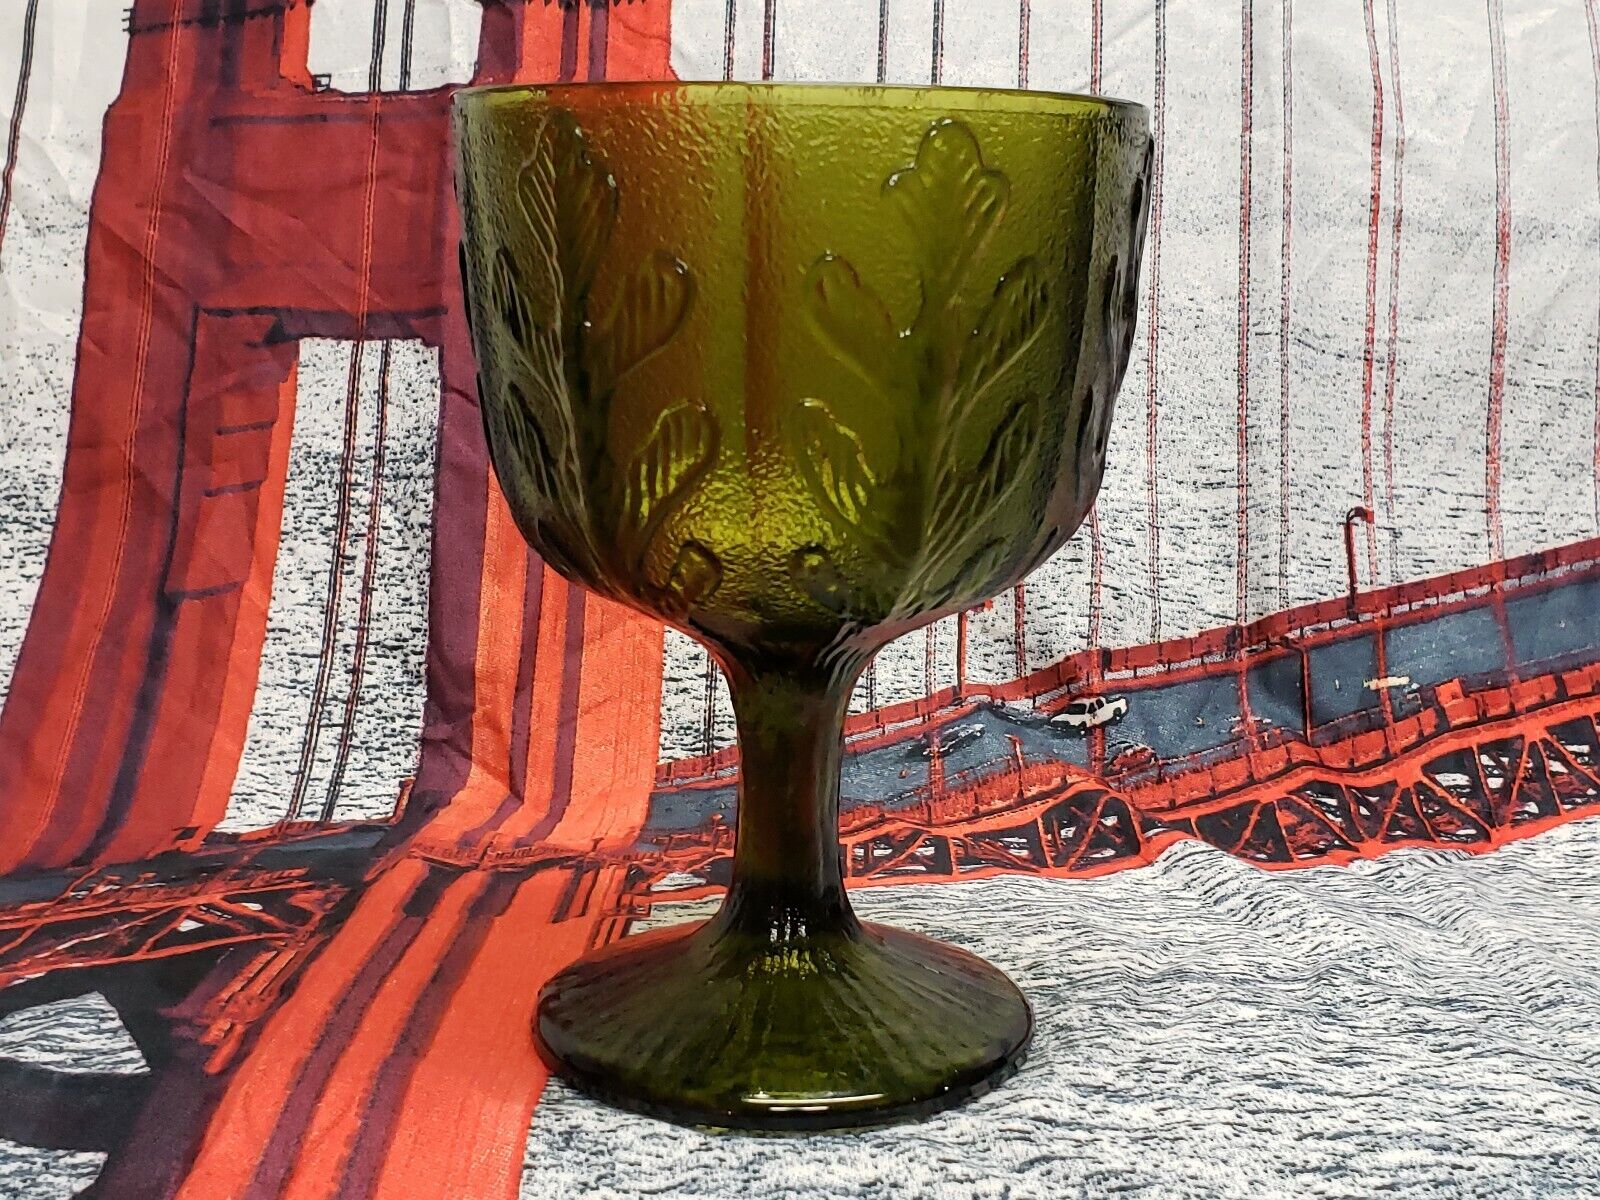 UNHOLY GLASS GRAIL UNNATURALLY GREEN WITH SACRED OAK LEAVES VINTAGE MUST HAVE